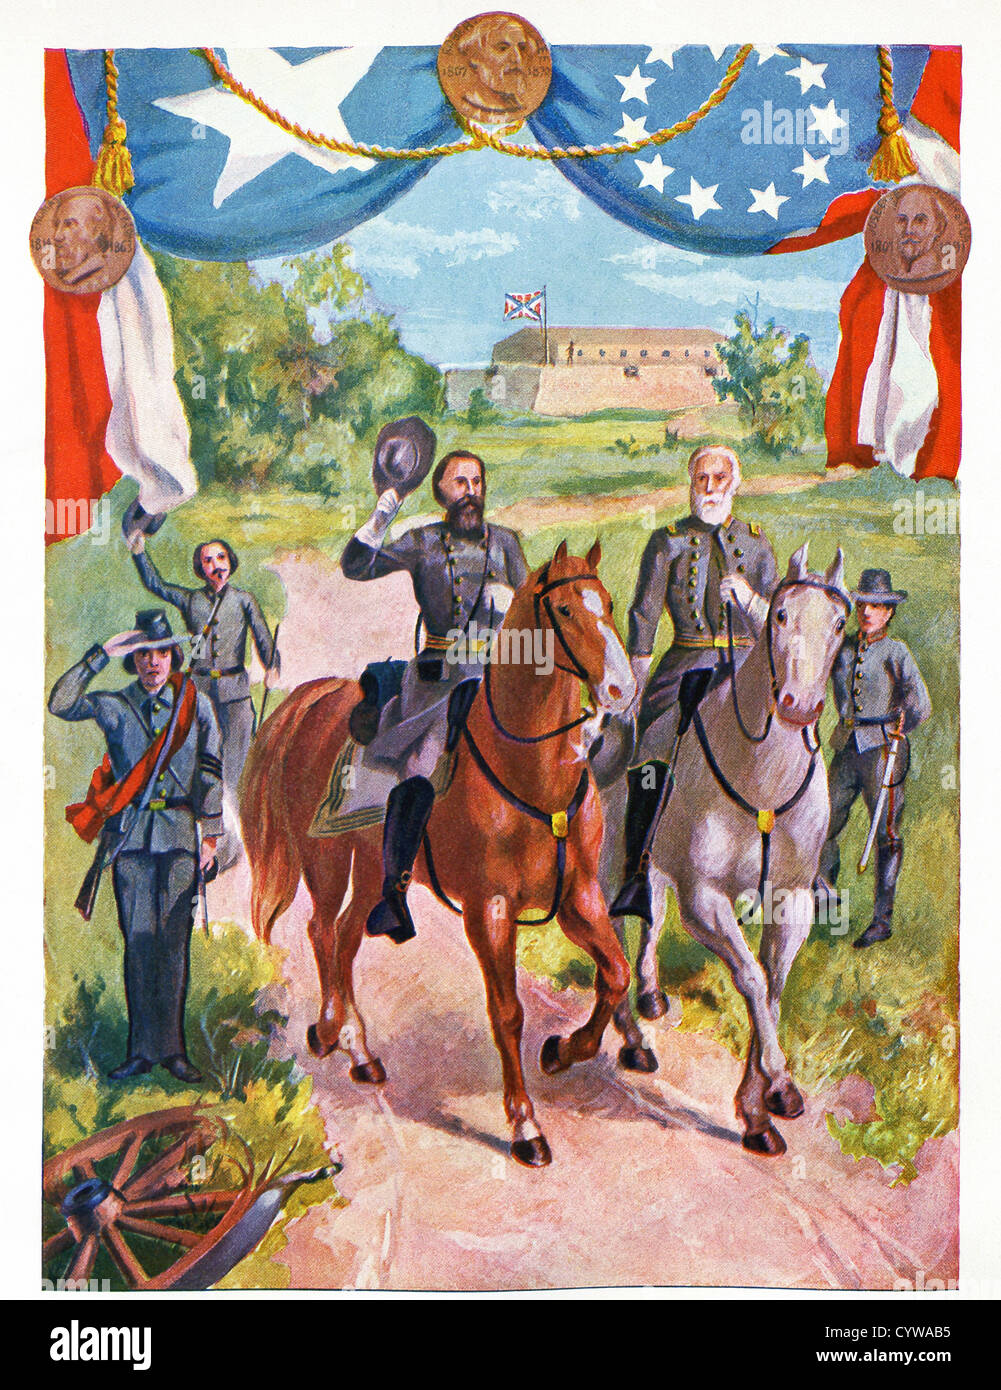 This illustration shows five military members of the Confederate Army, with the Confederate flag flying above the fort. Stock Photo